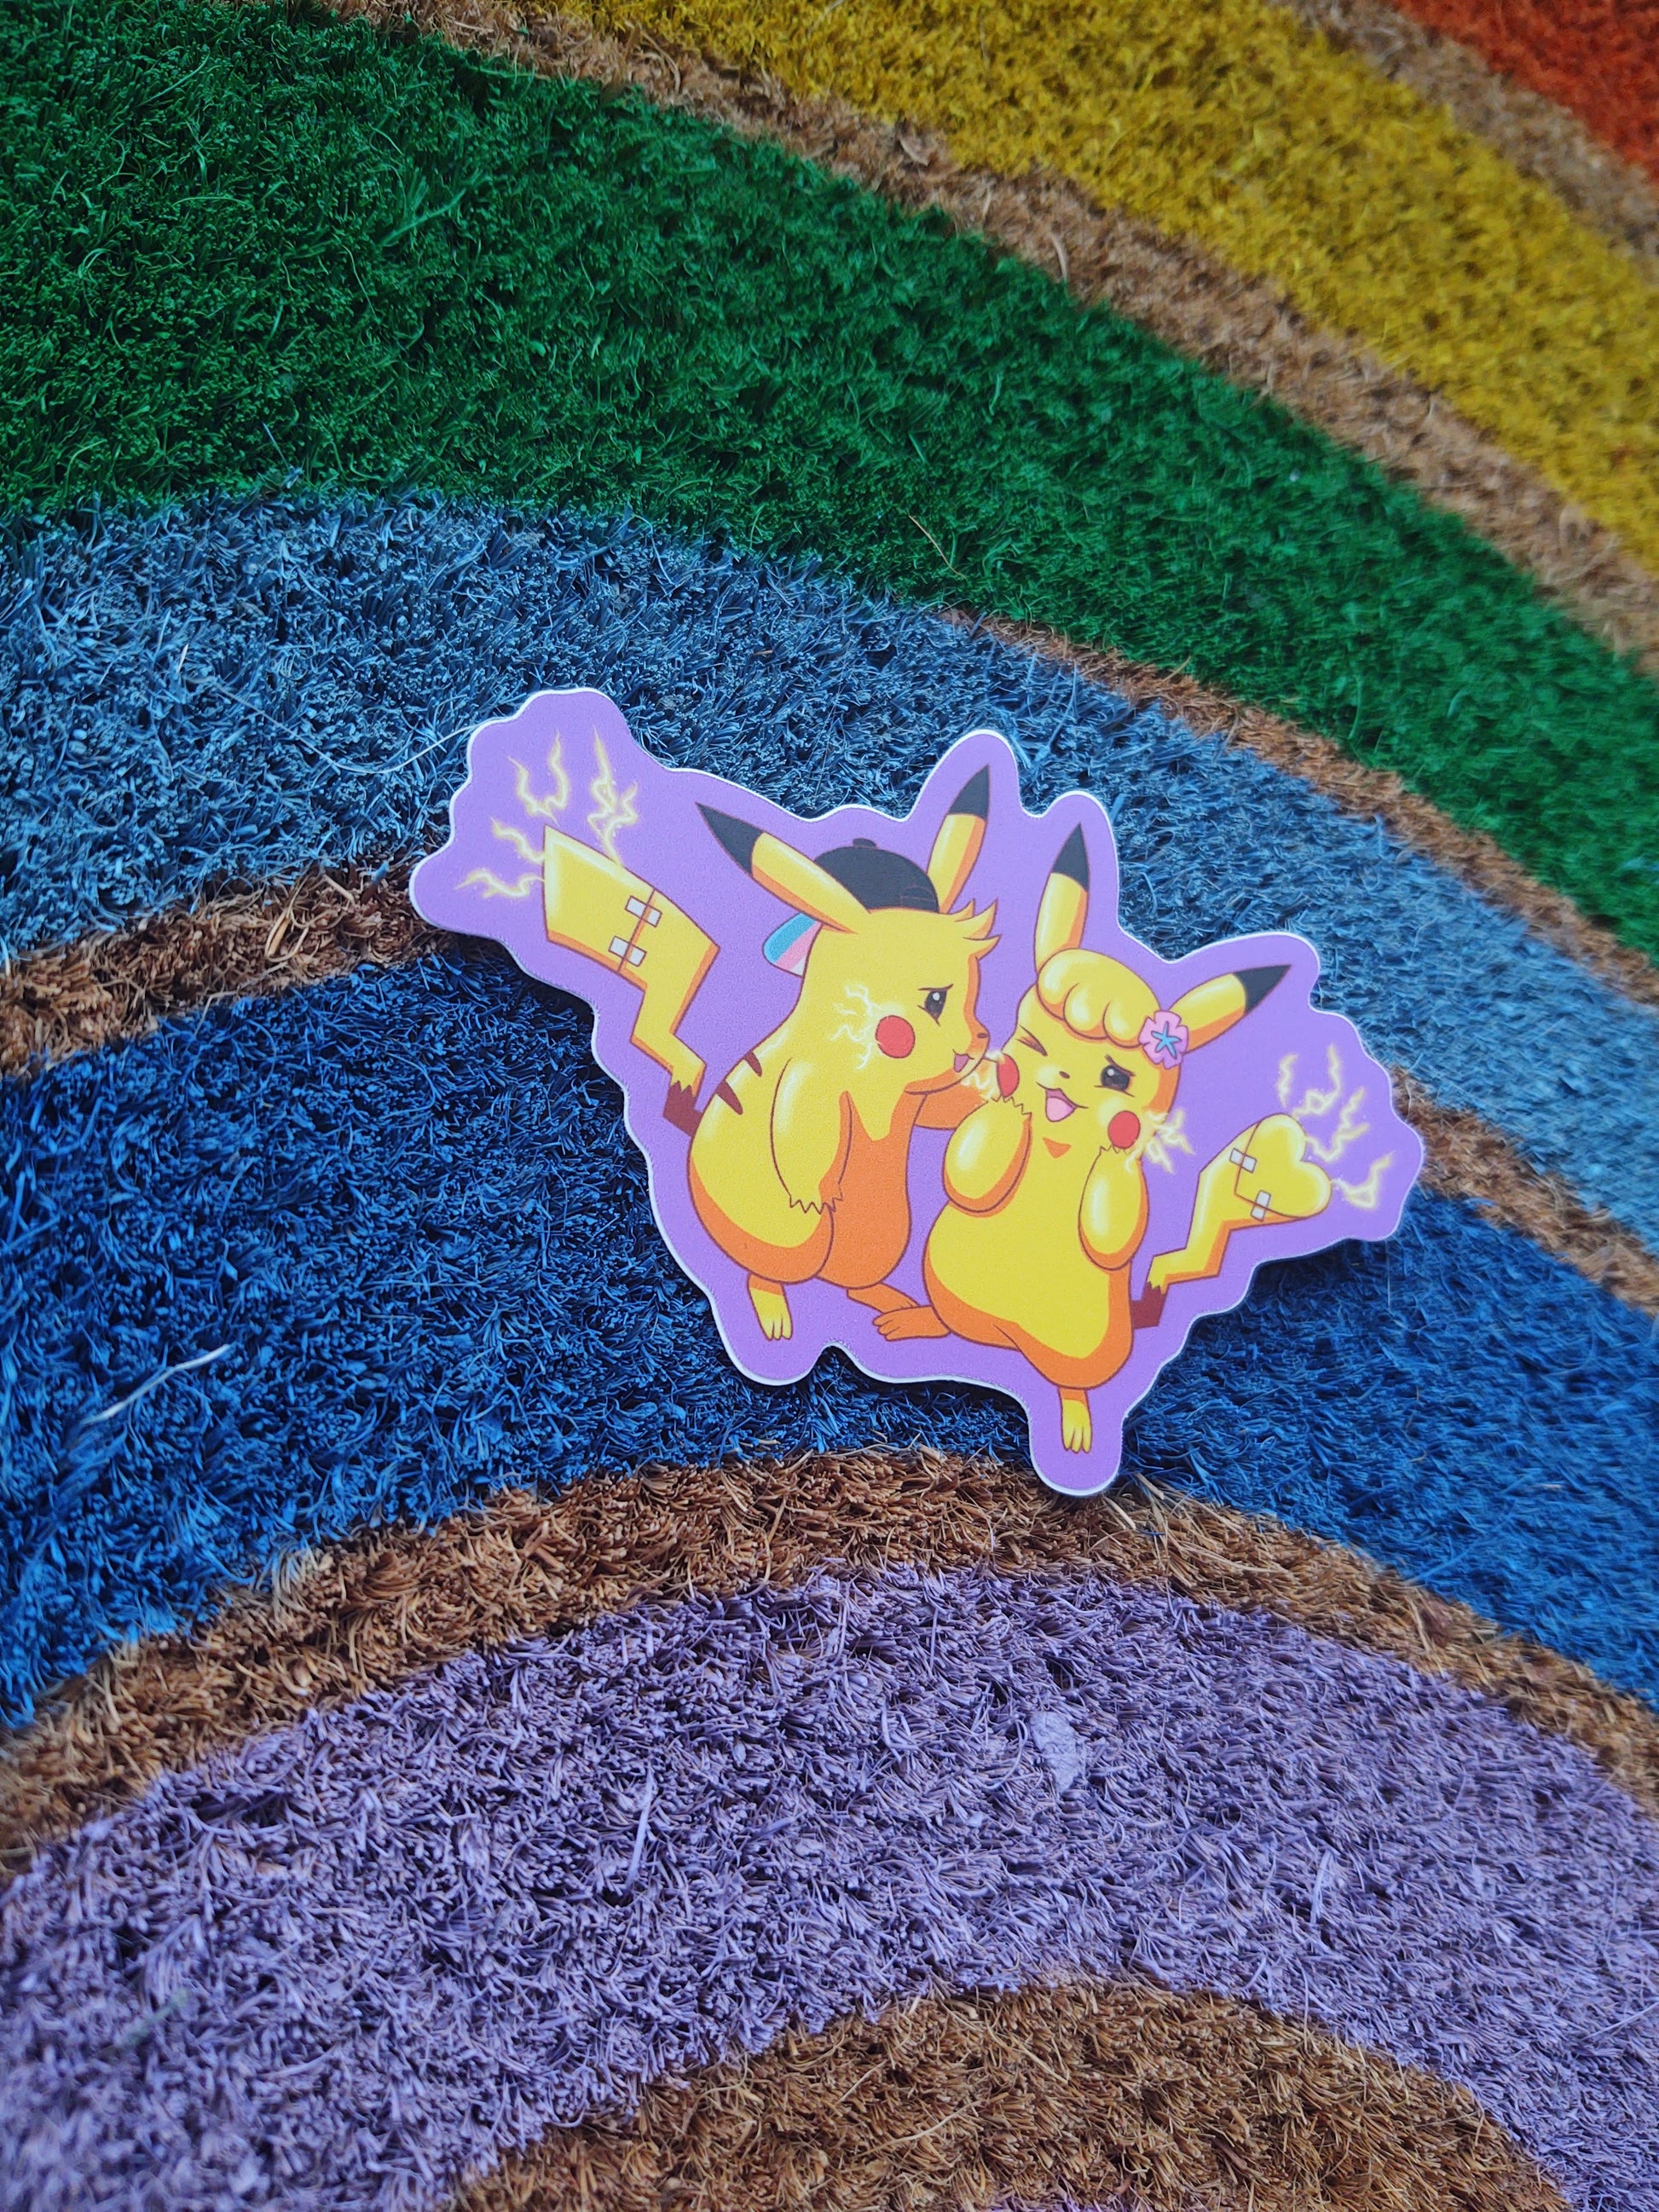 the trans for trans sticker at an angle on a rough rainbow background. the sticker is a pair of transgender animals with electric current flowing and a purple outline